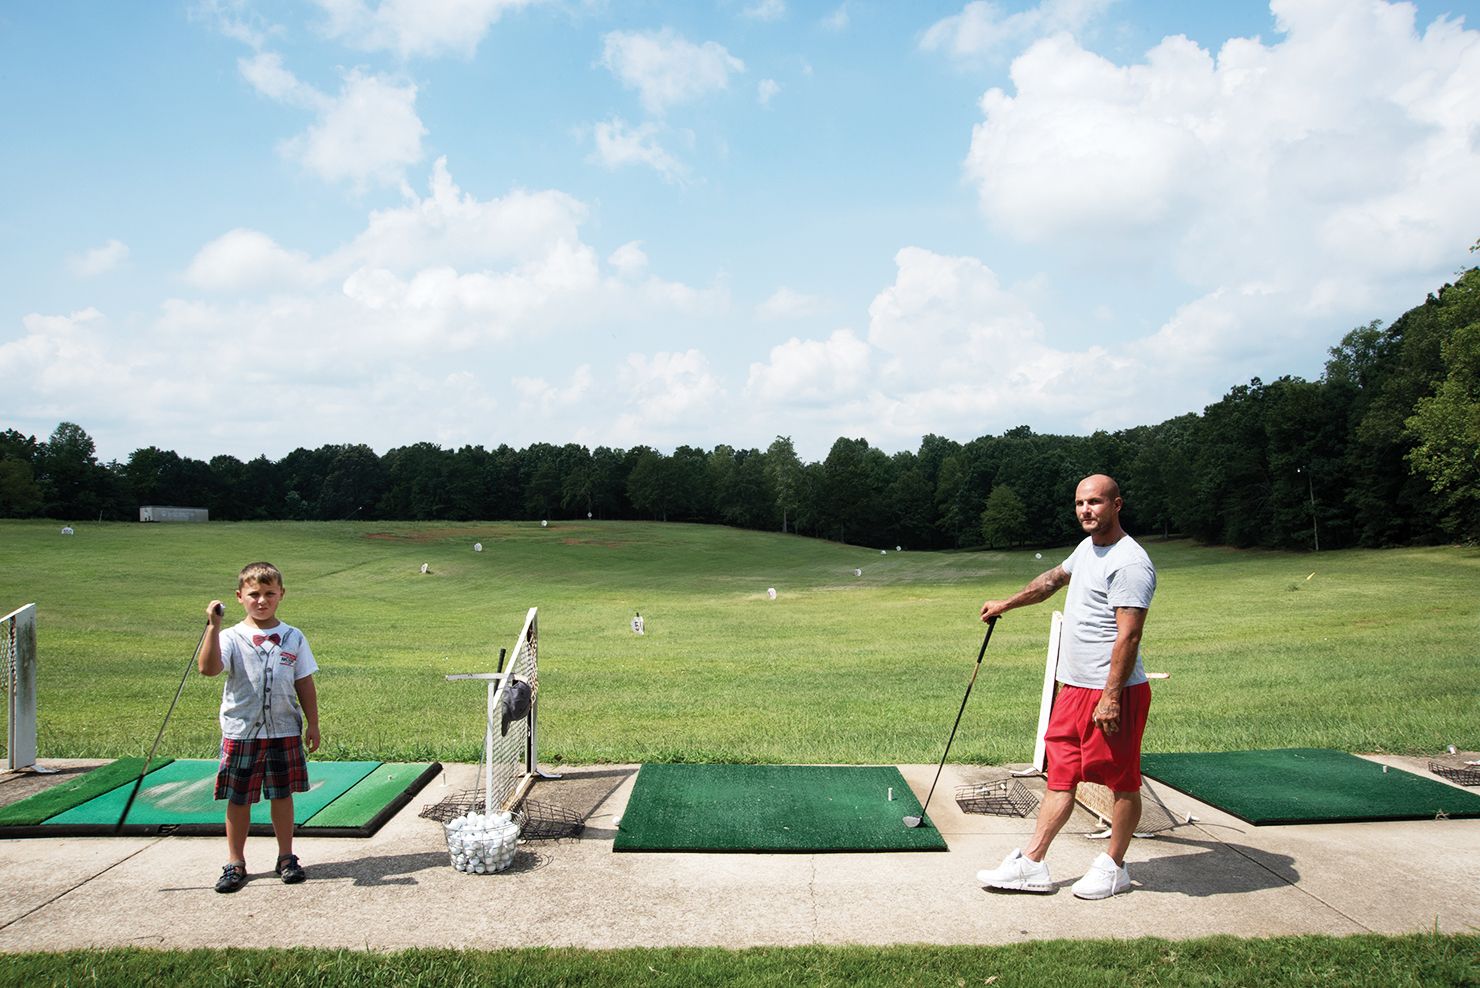 Wes Robida and his son Caden at the driving range on a Sunday afternoon. The family recently relocated from Denver to Greenville, attracted by the strong economy and cost of living. (1 of 10)